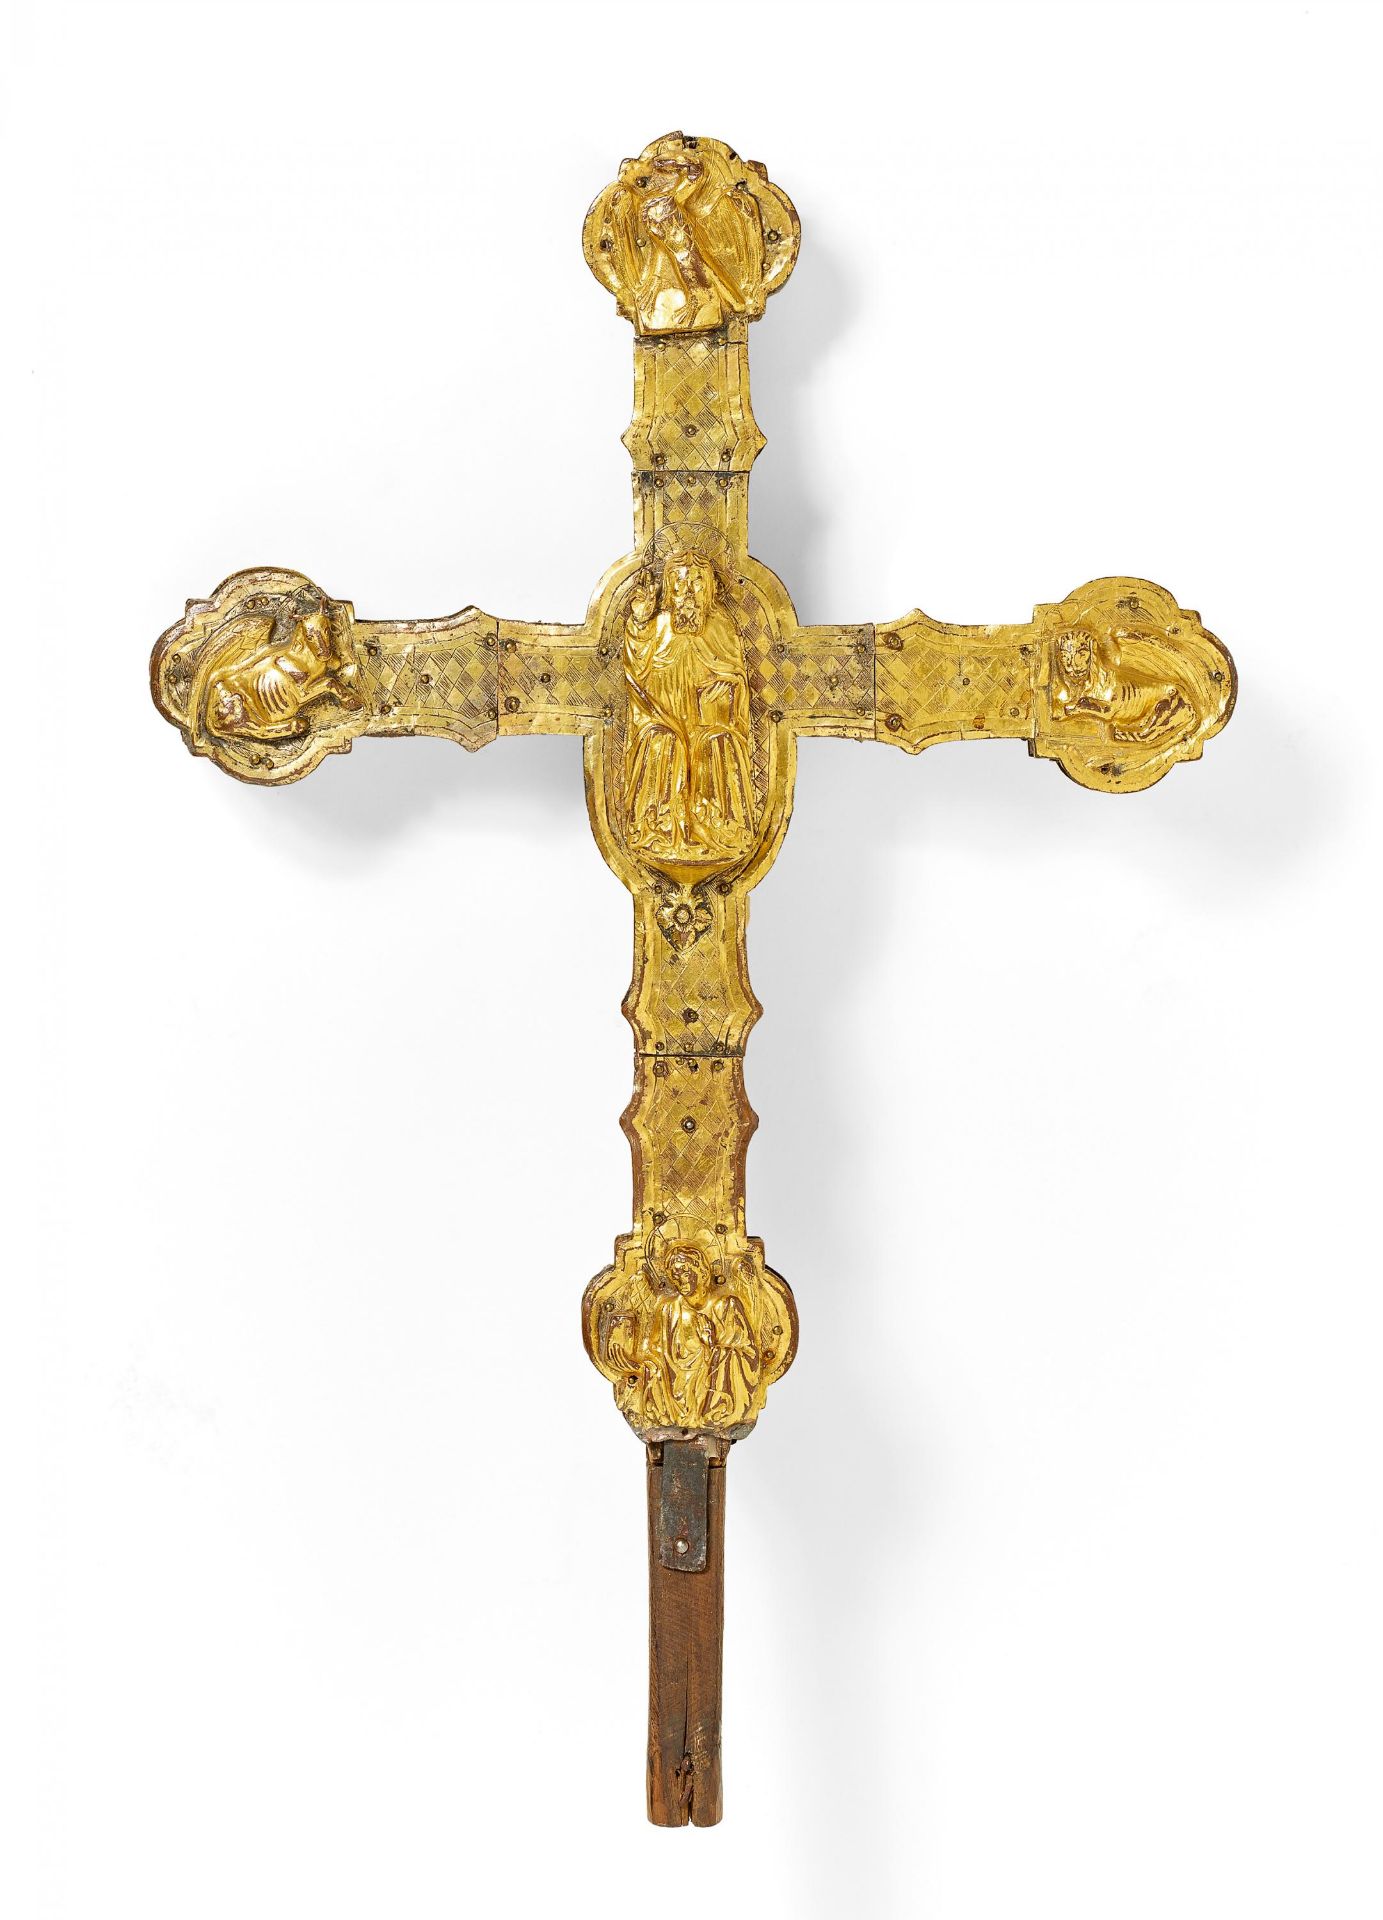 GOTHIC PROCESSIONAL CROSS MADE OF GILT COPPER ON WOODEN CORE. Italy. Date: Presumably around 1500. - Bild 2 aus 2